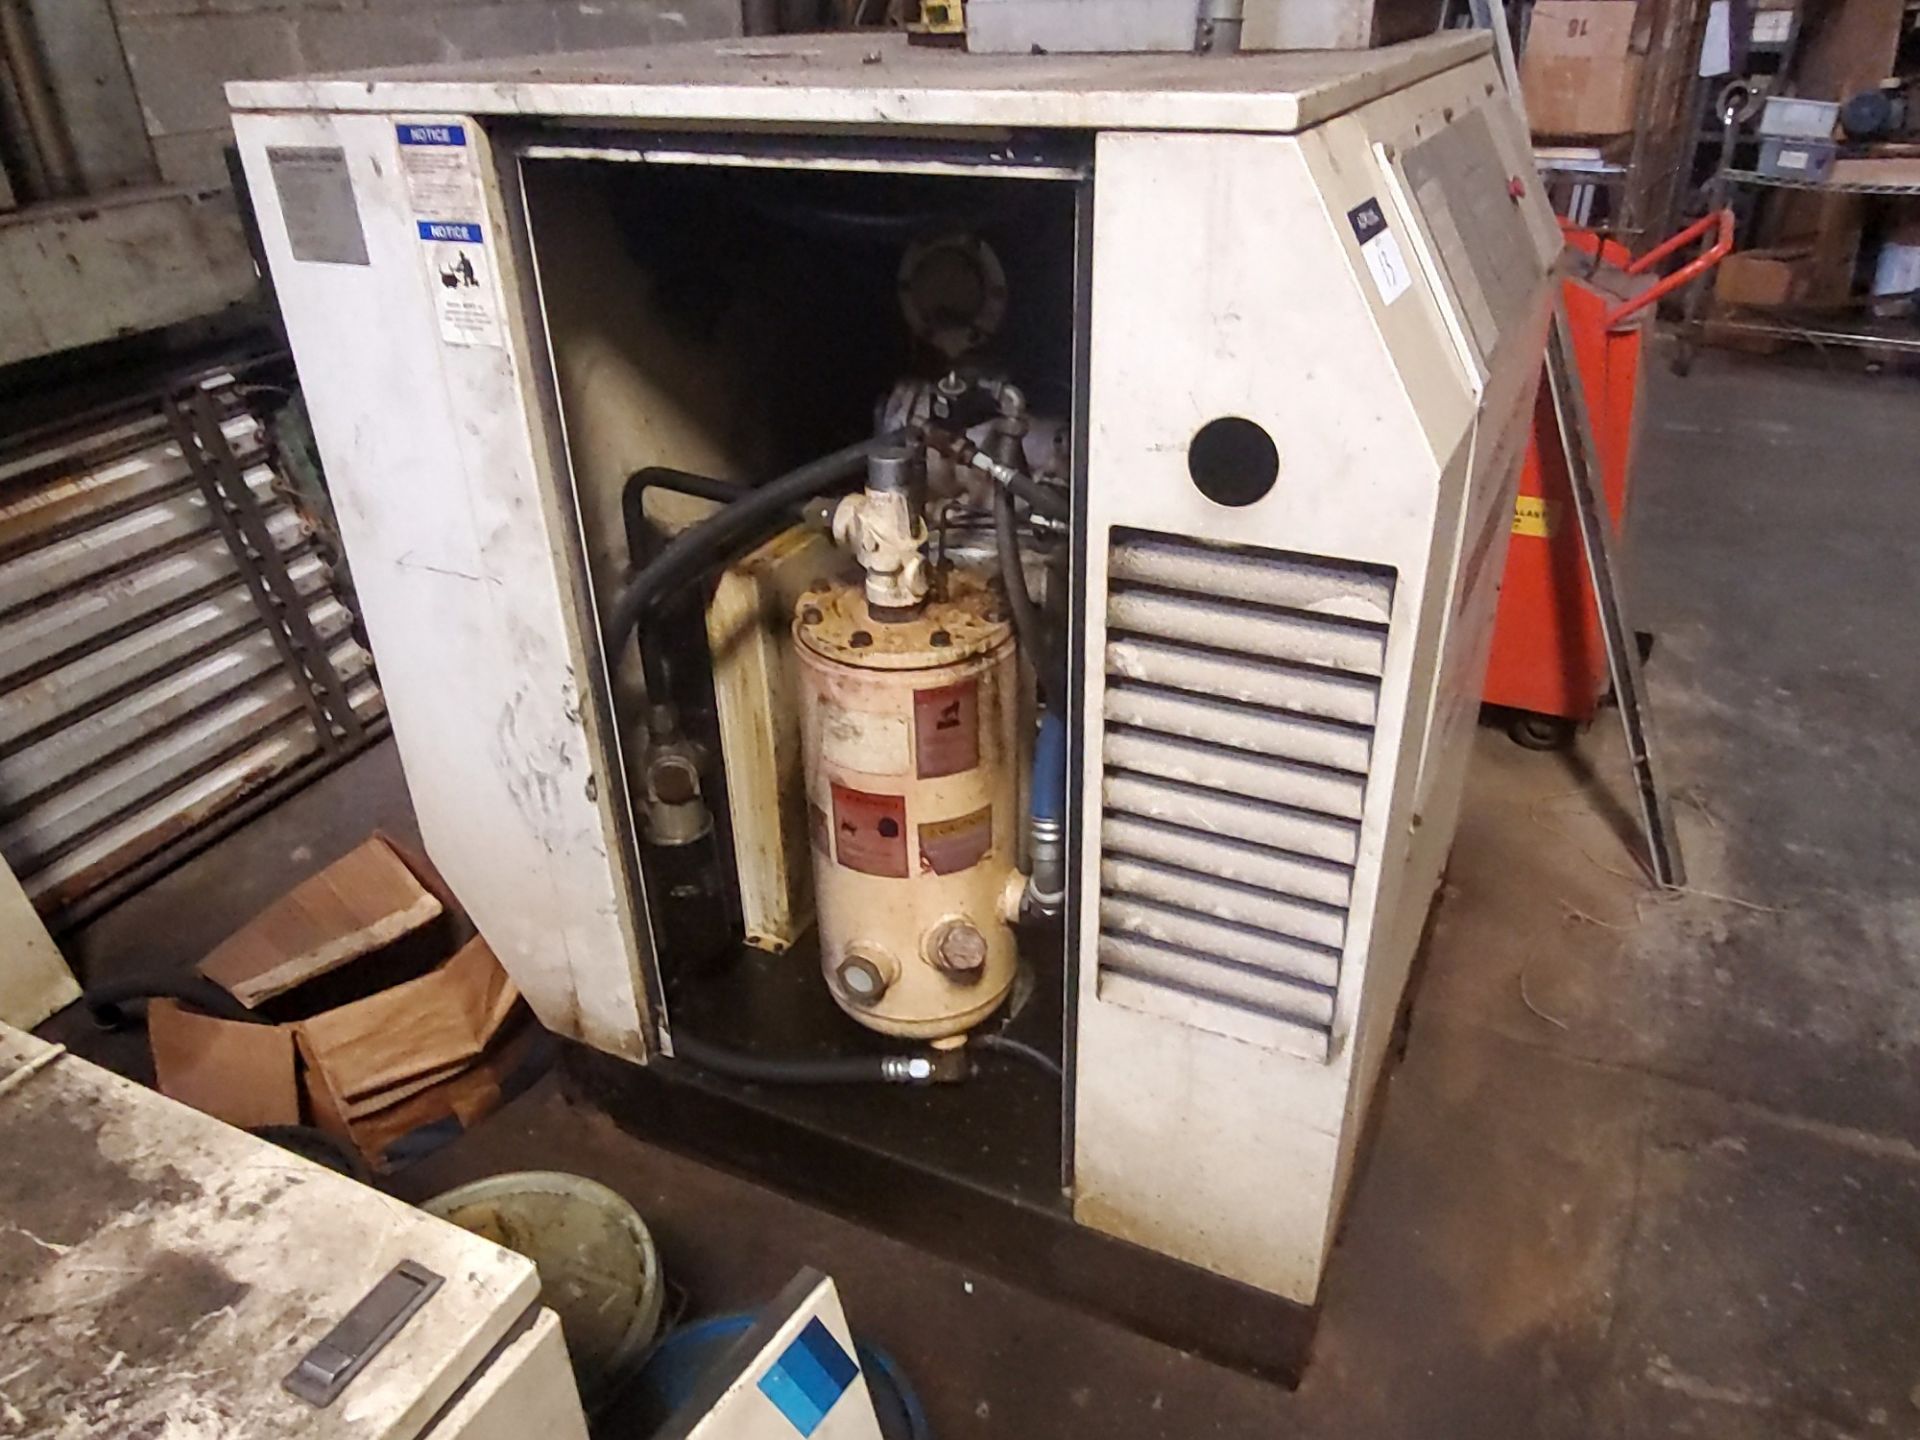 Ingersoll Rand SSR-EP40SE 127 Psi 157 CFM Rotary Screw Air Compressor - Image 3 of 6